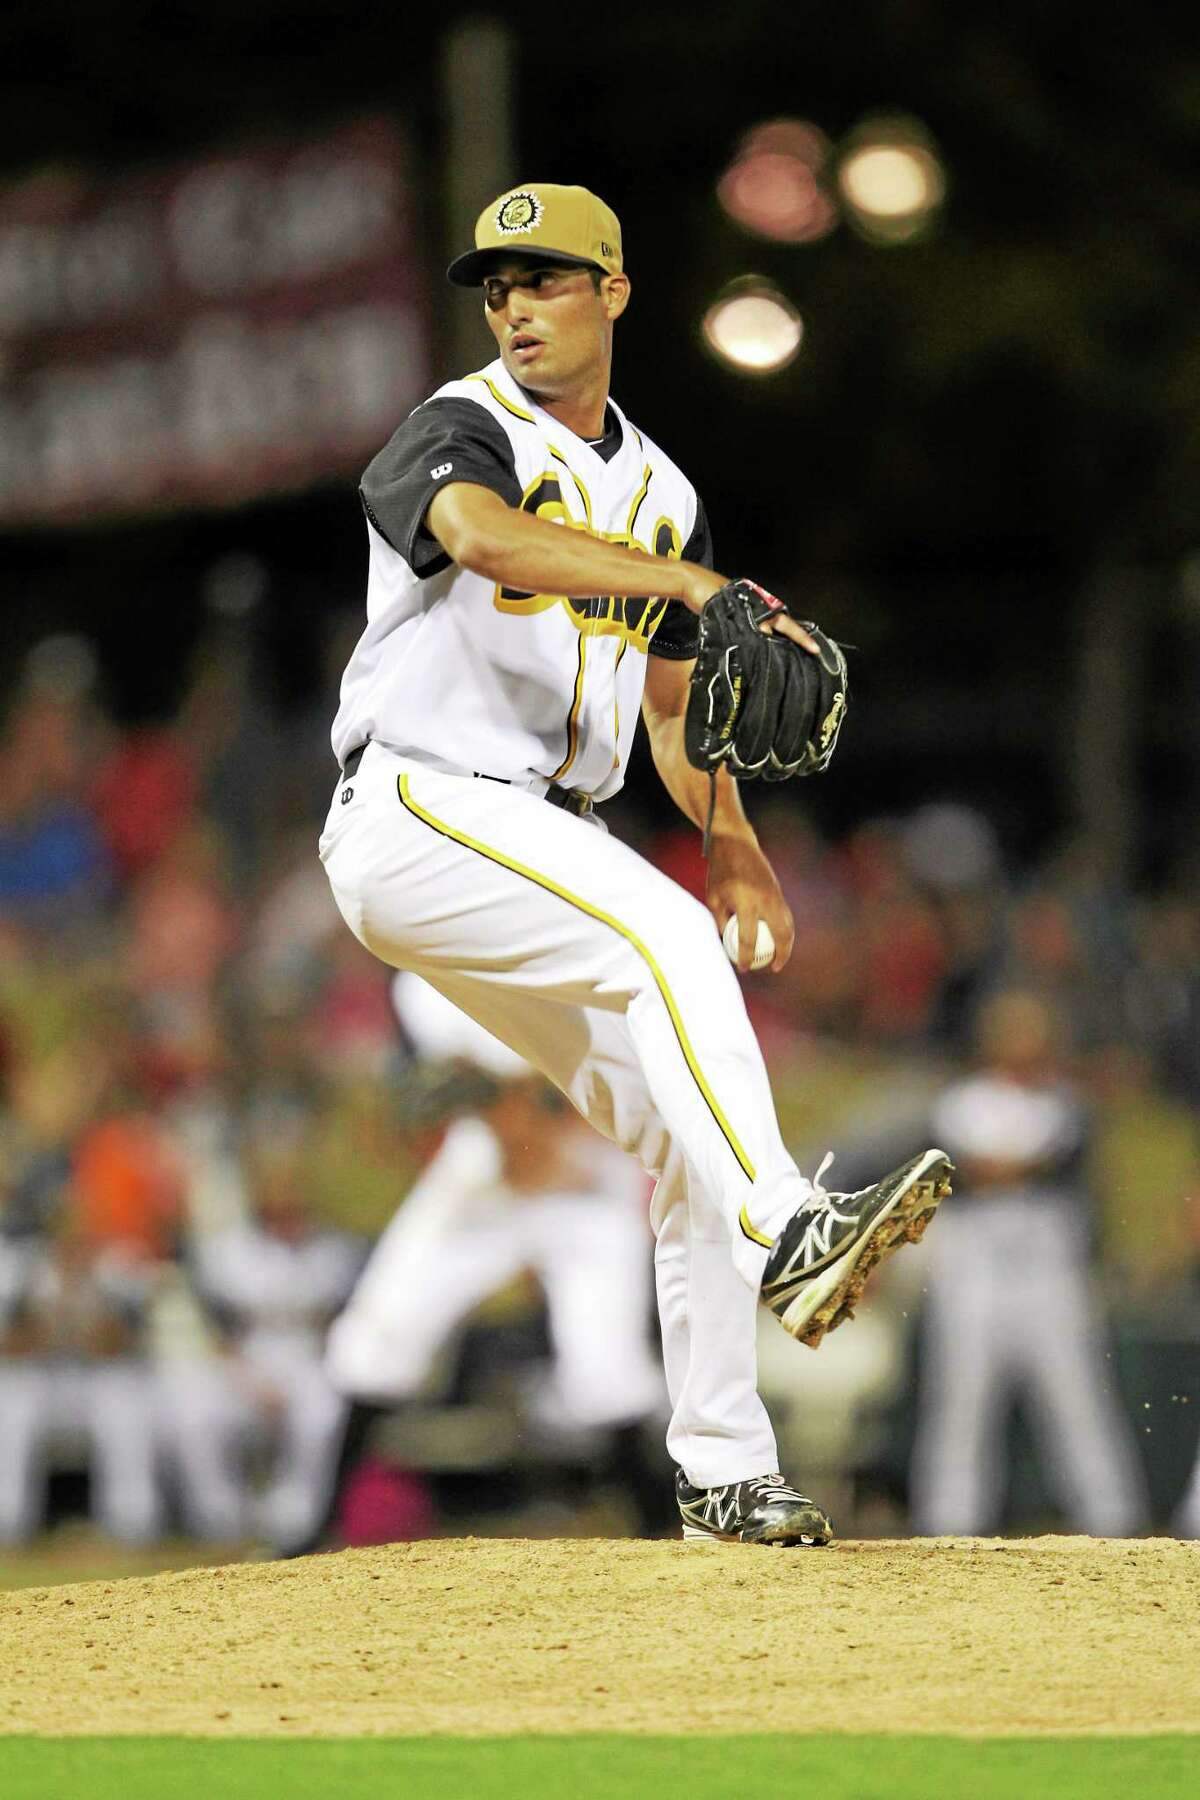 Madison native and UConn product Greg Nappo is 3-0 with a 2.01 ERA for the Double-A Jacksonville Suns this season.